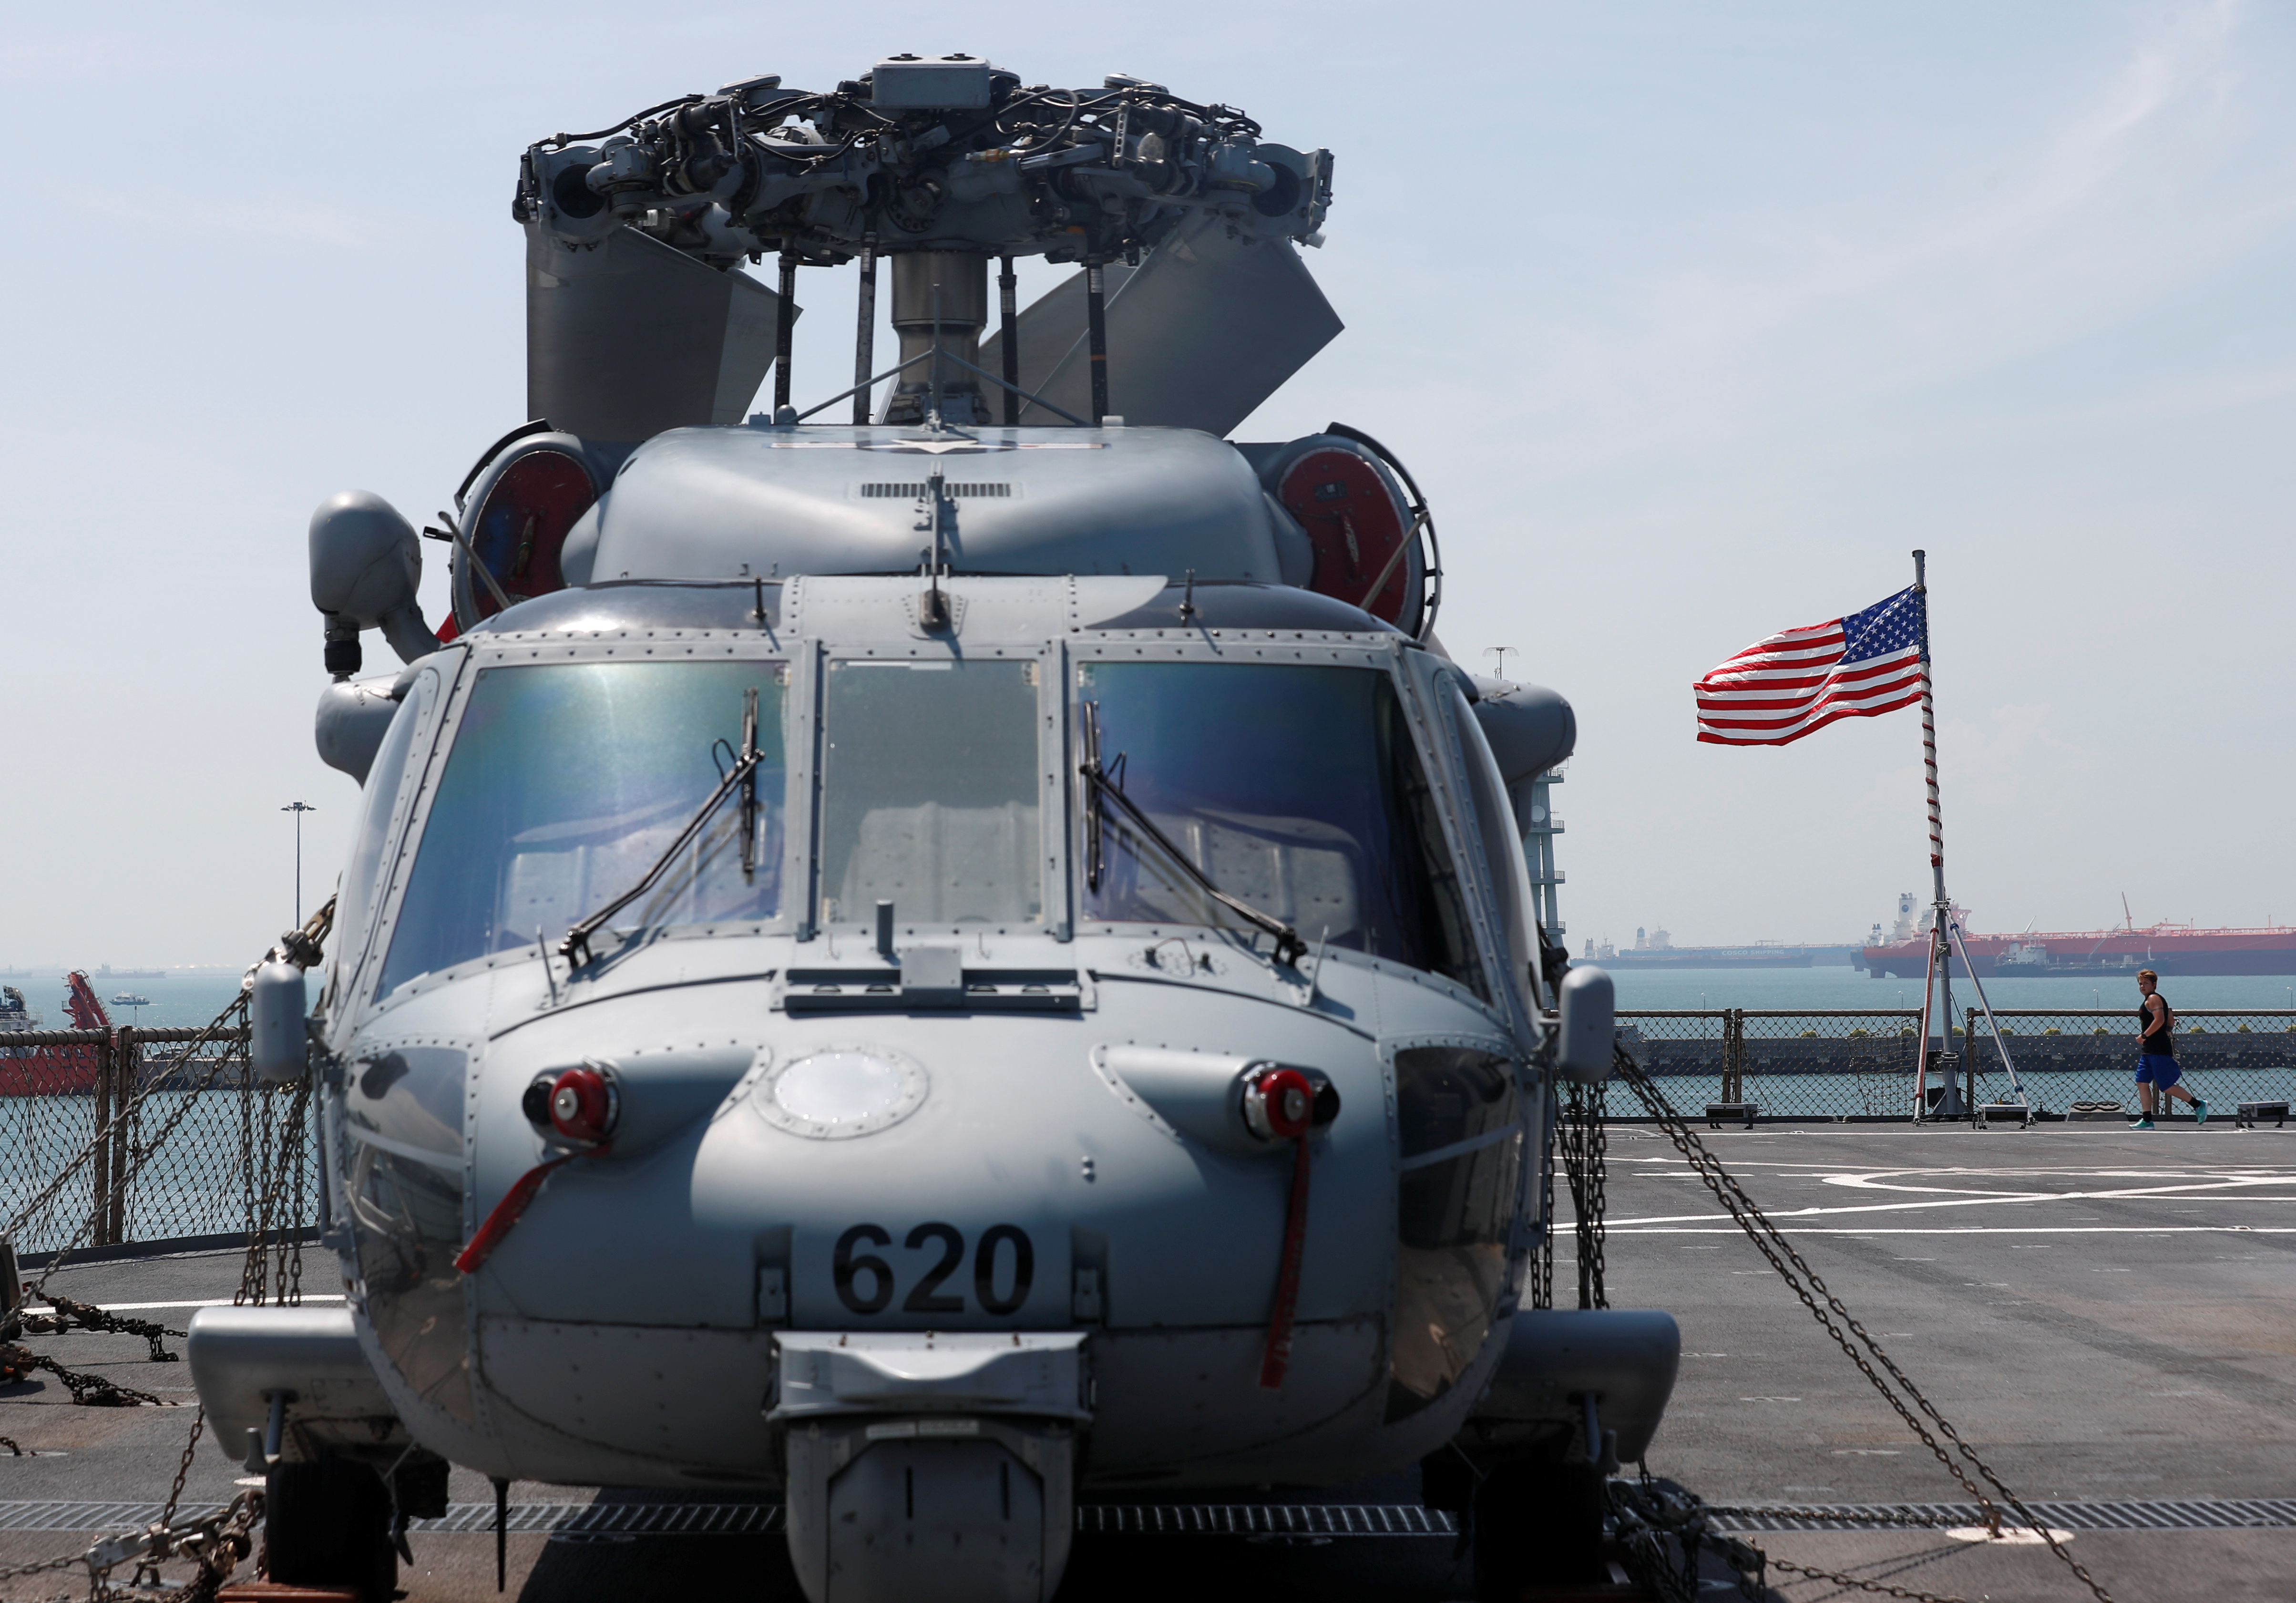 A serviceman jogs past a Sikorsky SH-60 Seahawk helicopter onboard the USS Blue Ridge (LCC 19) in Singapore